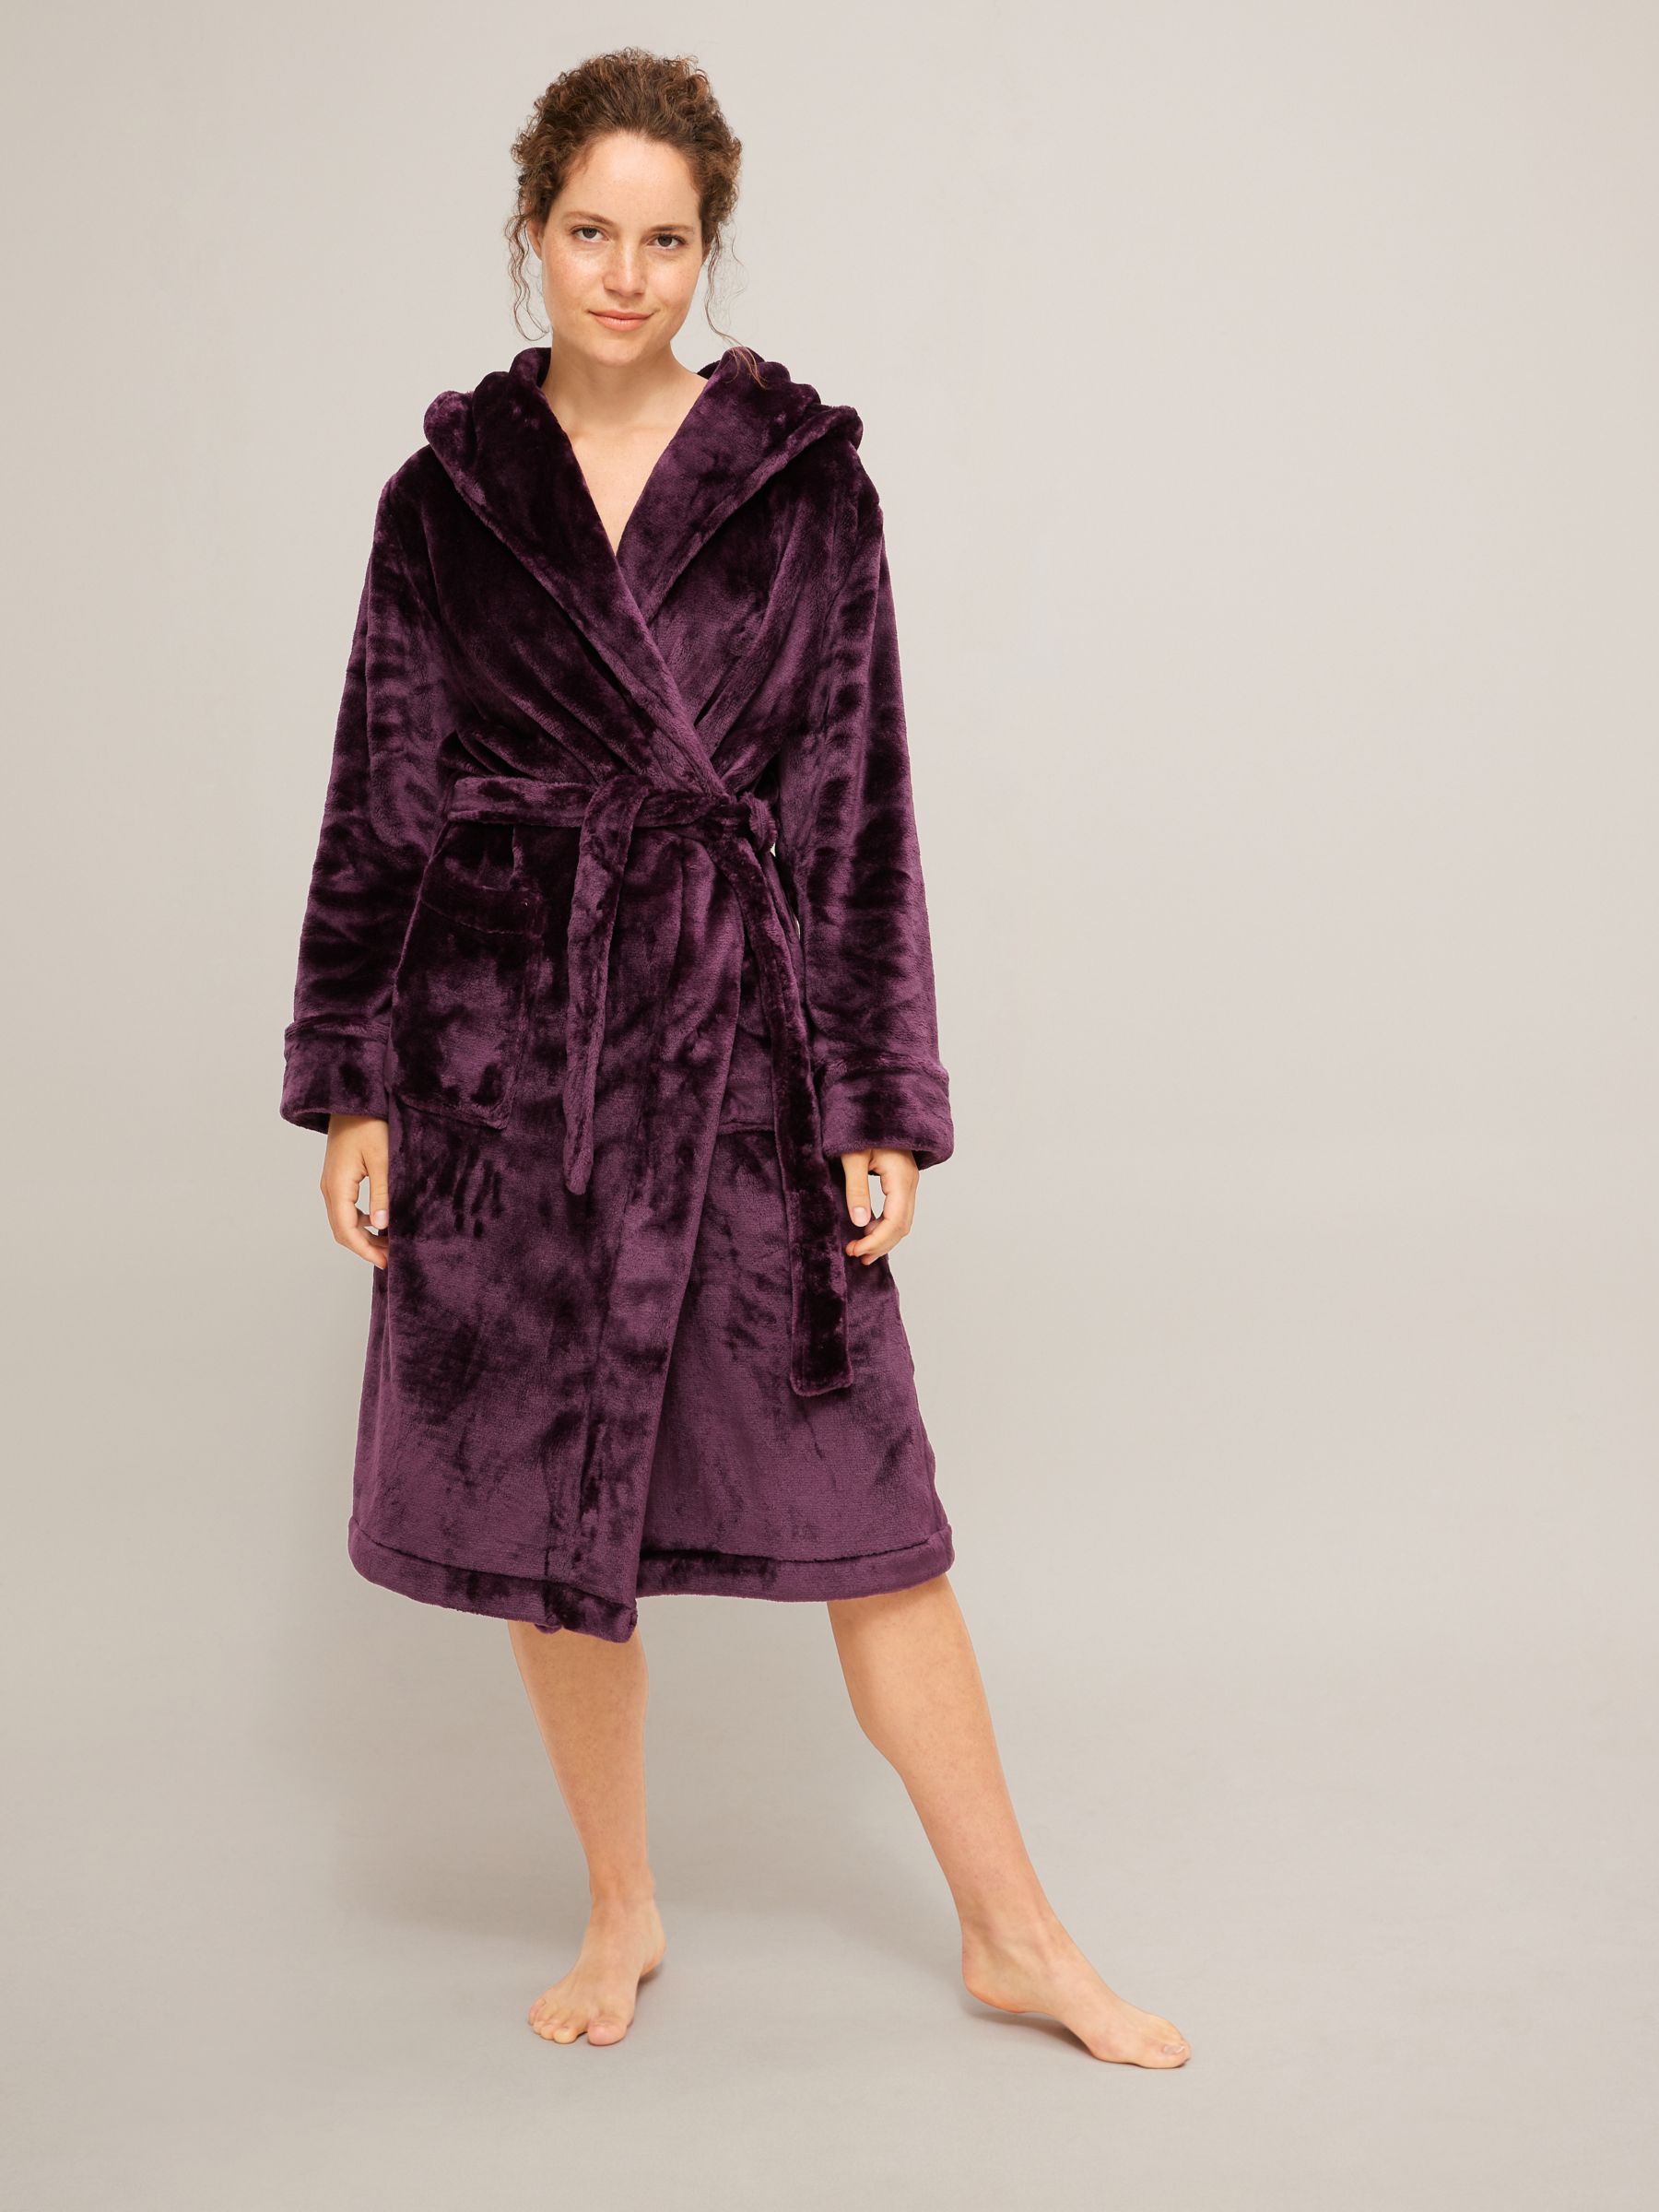 John Lewis Cece Luxury Shimmer Dressing Gown, Berry, S